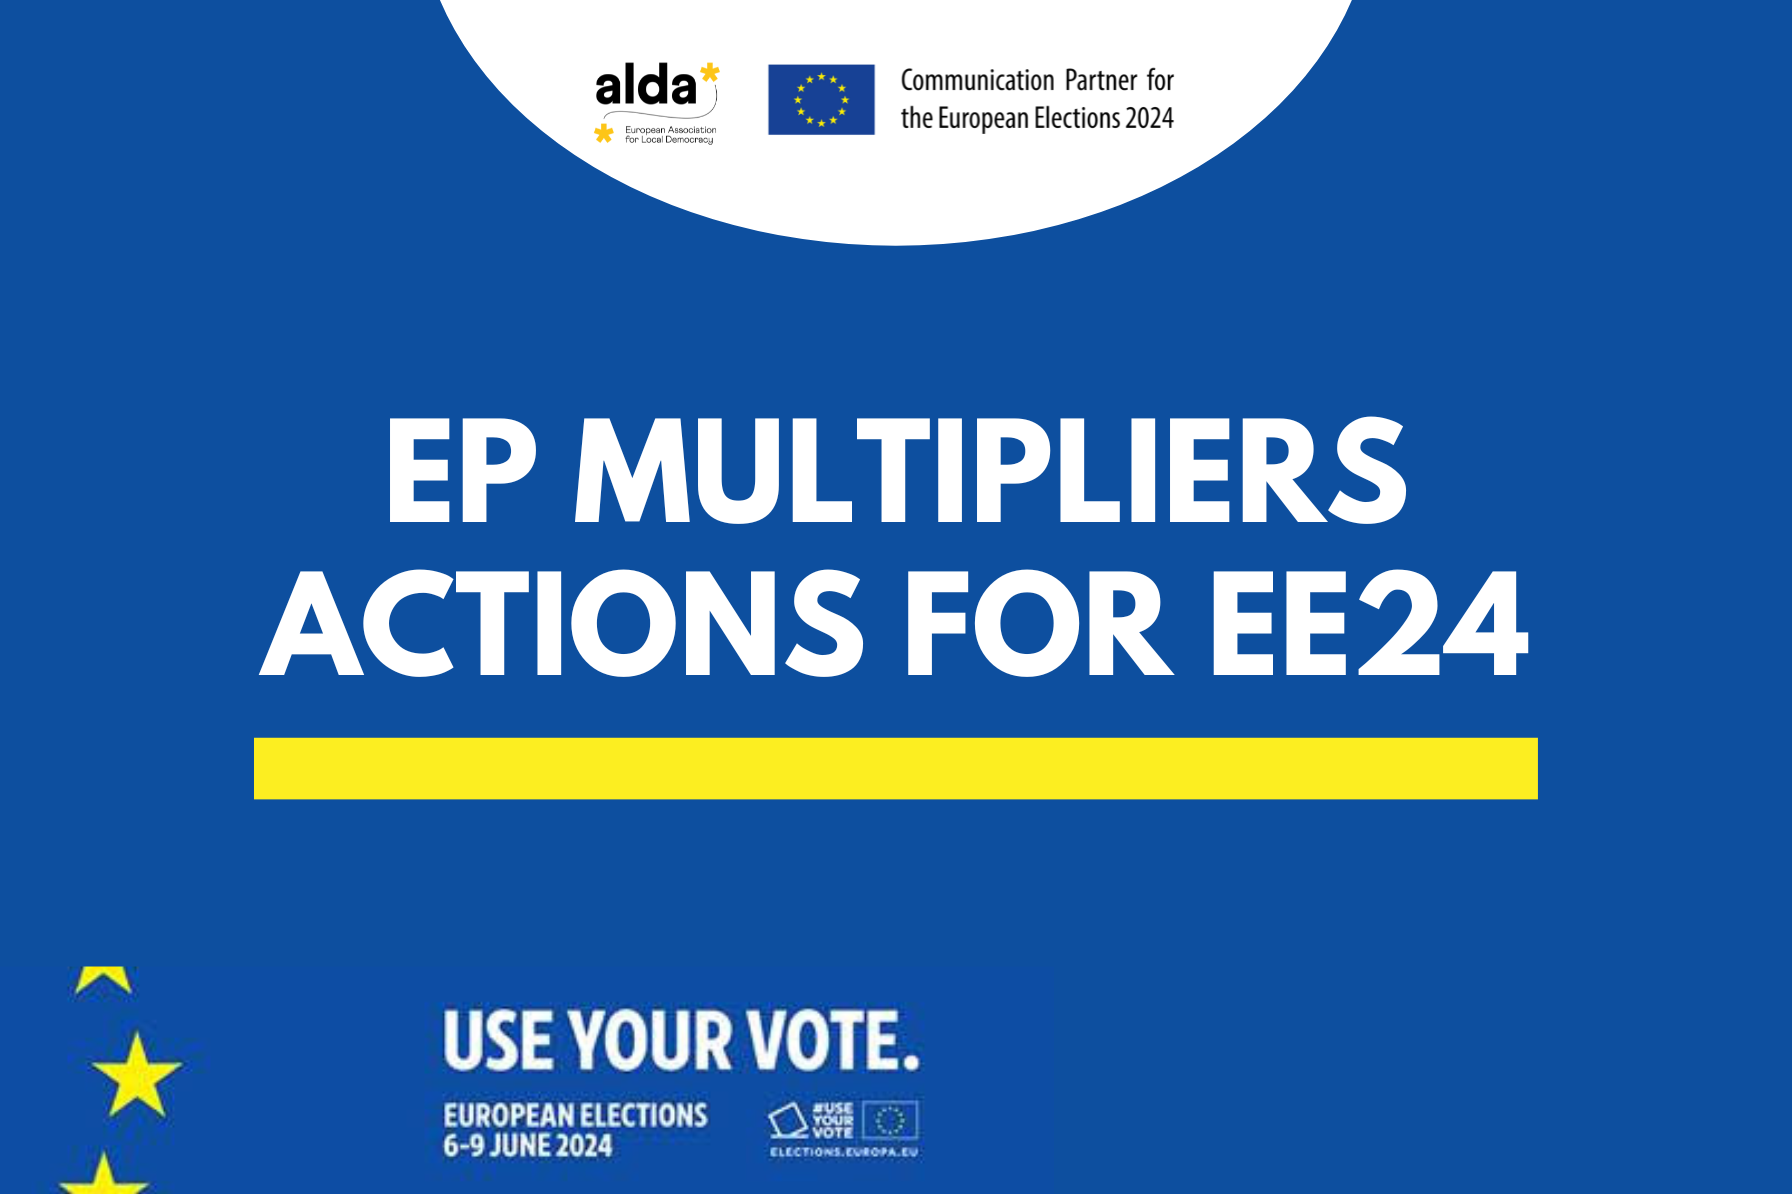 "Multipliers actions for EE24 - Partners networking event"